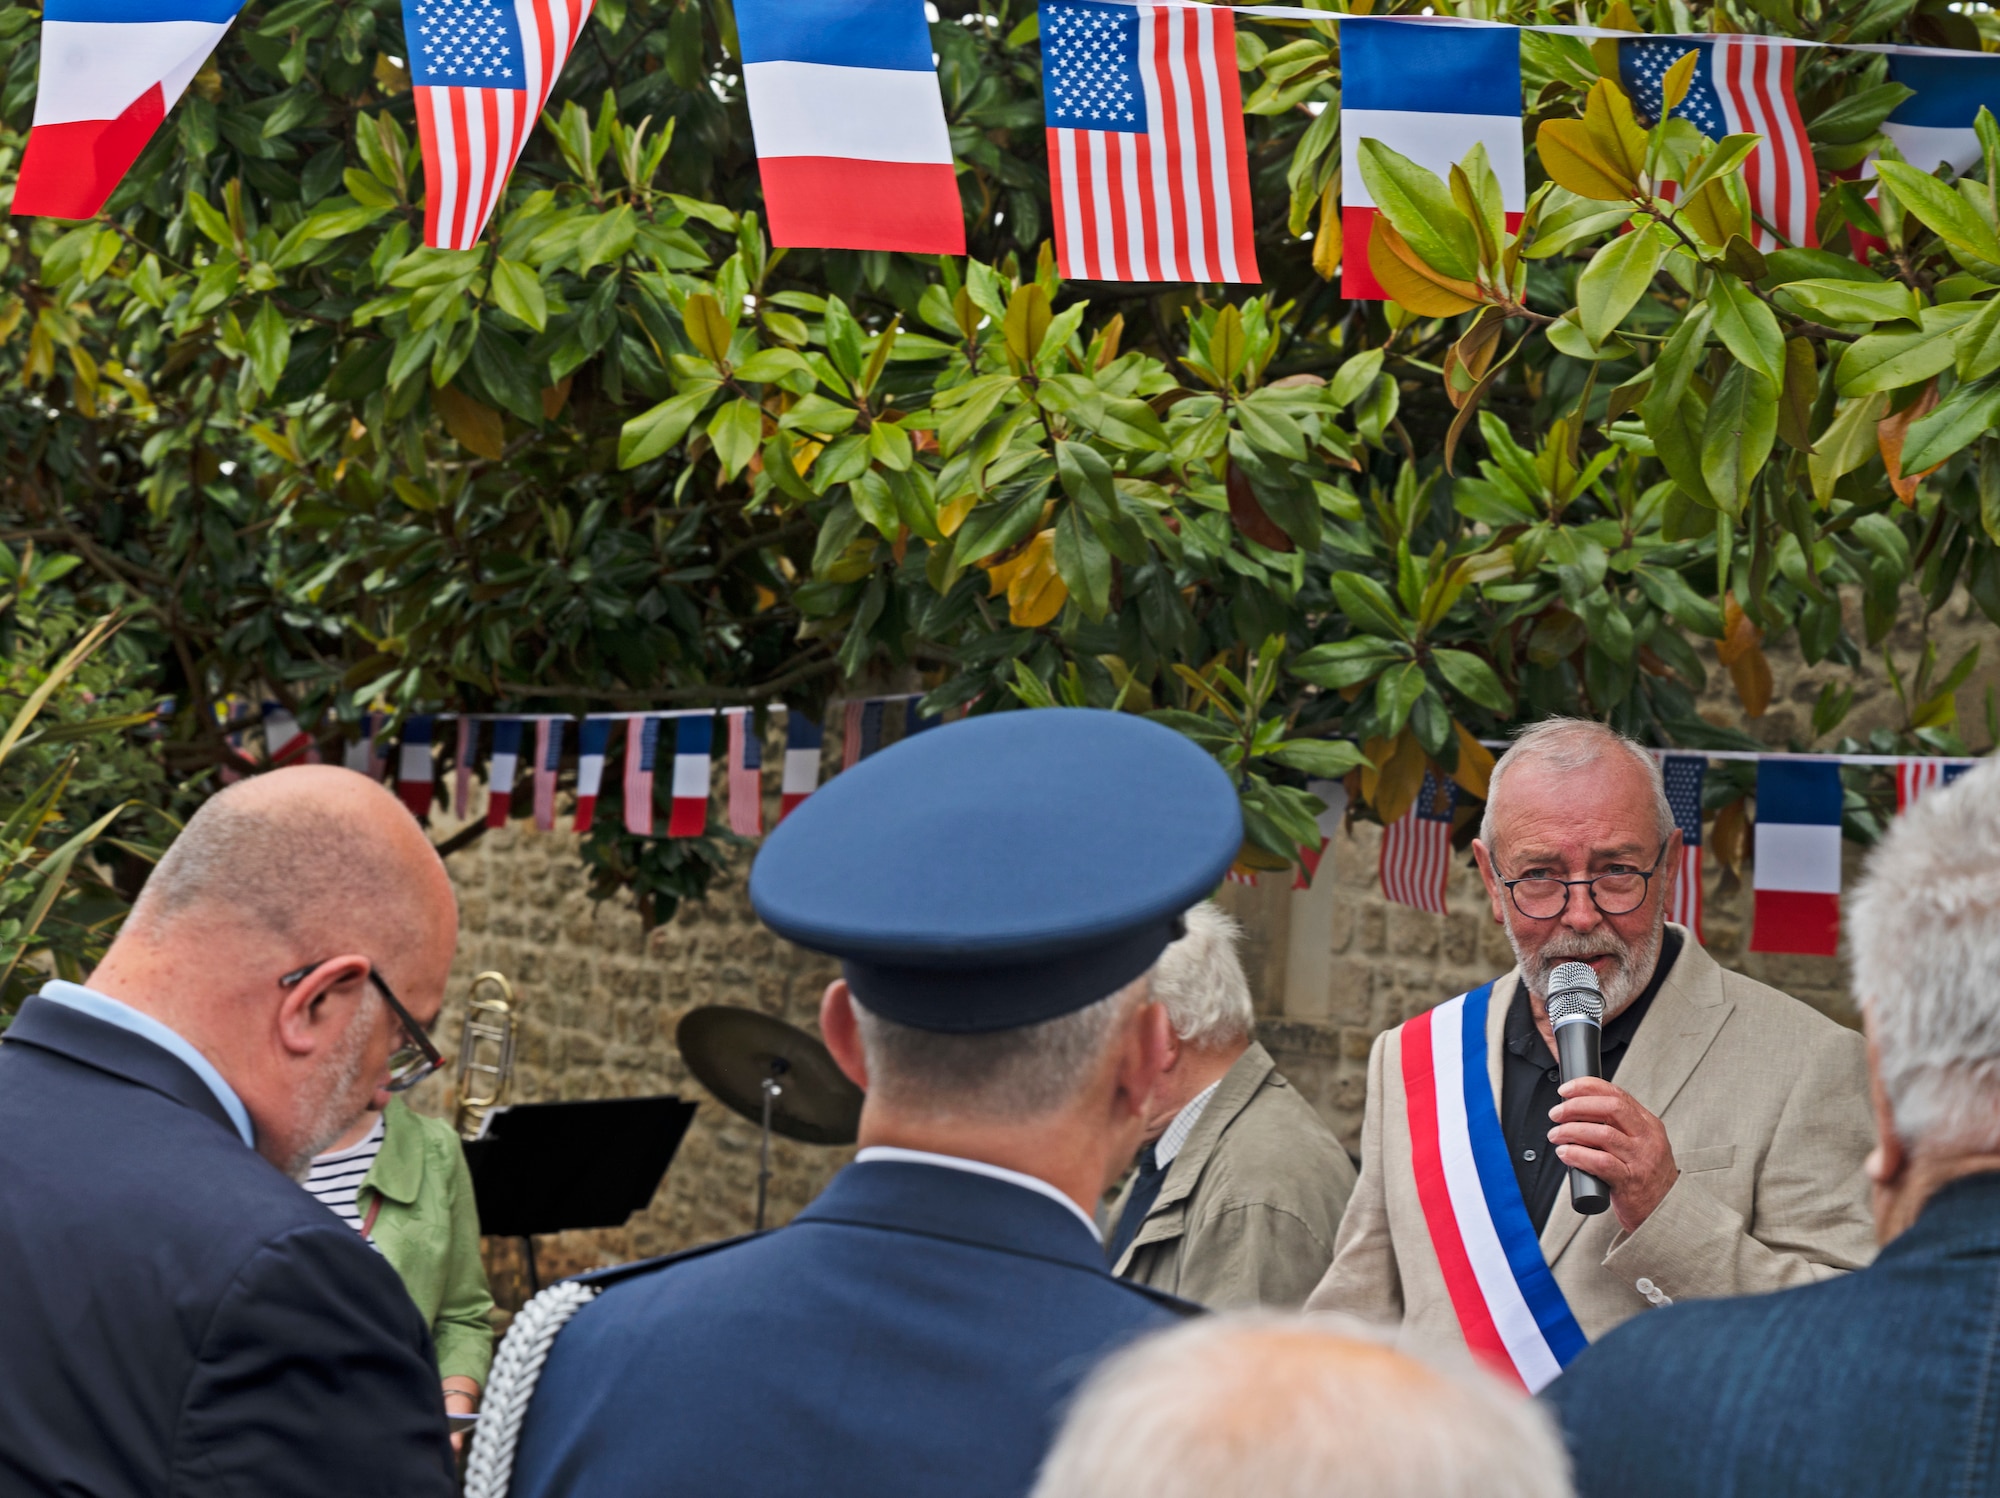 Guy Ledenechal, the Mayor of Negreville, France, gives a speech during a D-Day ceremony June 3, 2022. Negreville has hosted a D-Day ceremony every year since 1999 to commemorate those who gave their lives to free France during the Normandy landings on June 6, 1944. (U.S. Air Force photo by Senior Airman Thomas Karol)